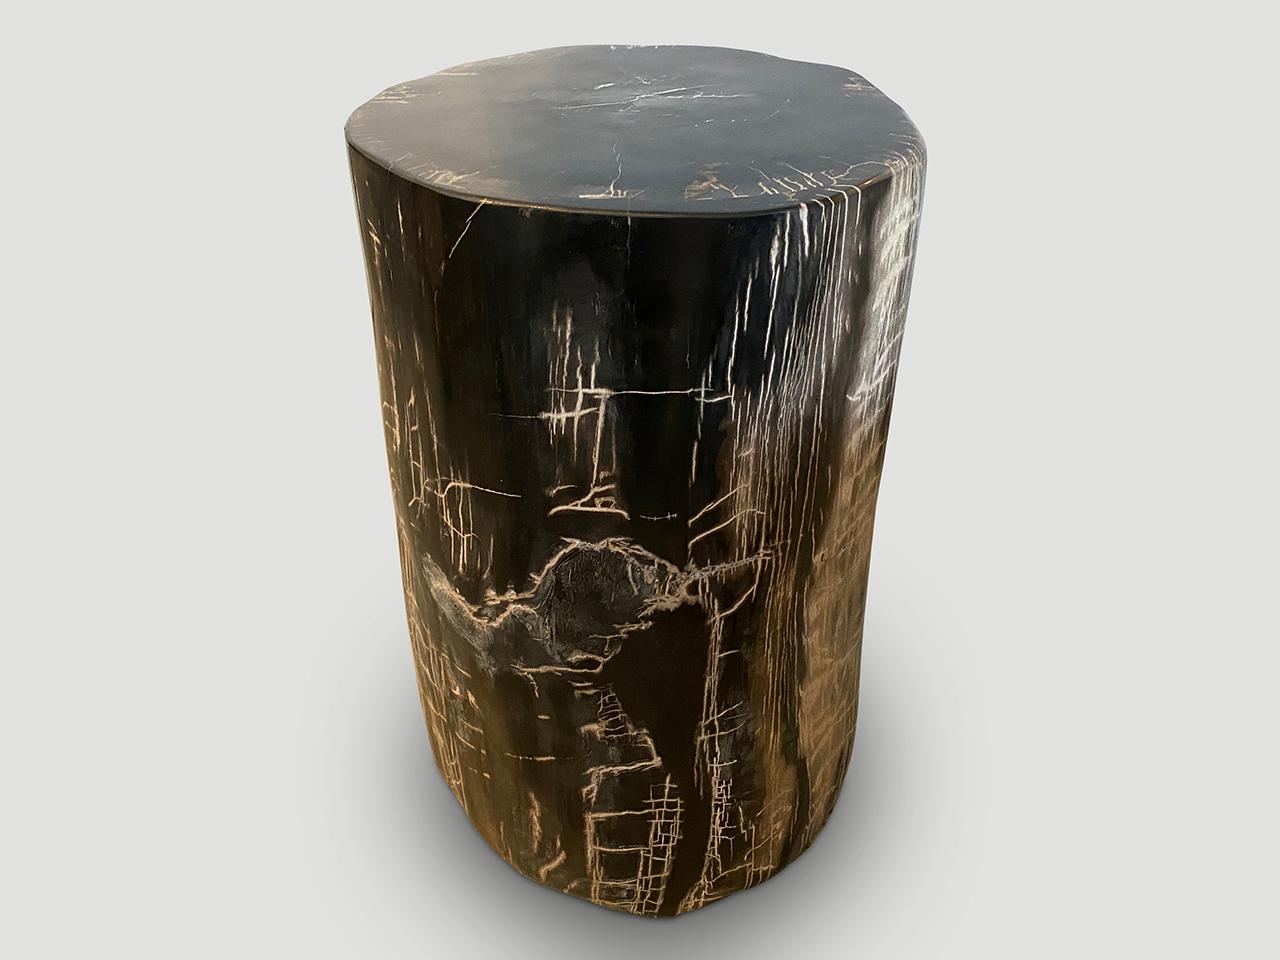 Andrianna Shamaris Exquisite High Quality Petrified Wood Side Table In Excellent Condition For Sale In New York, NY